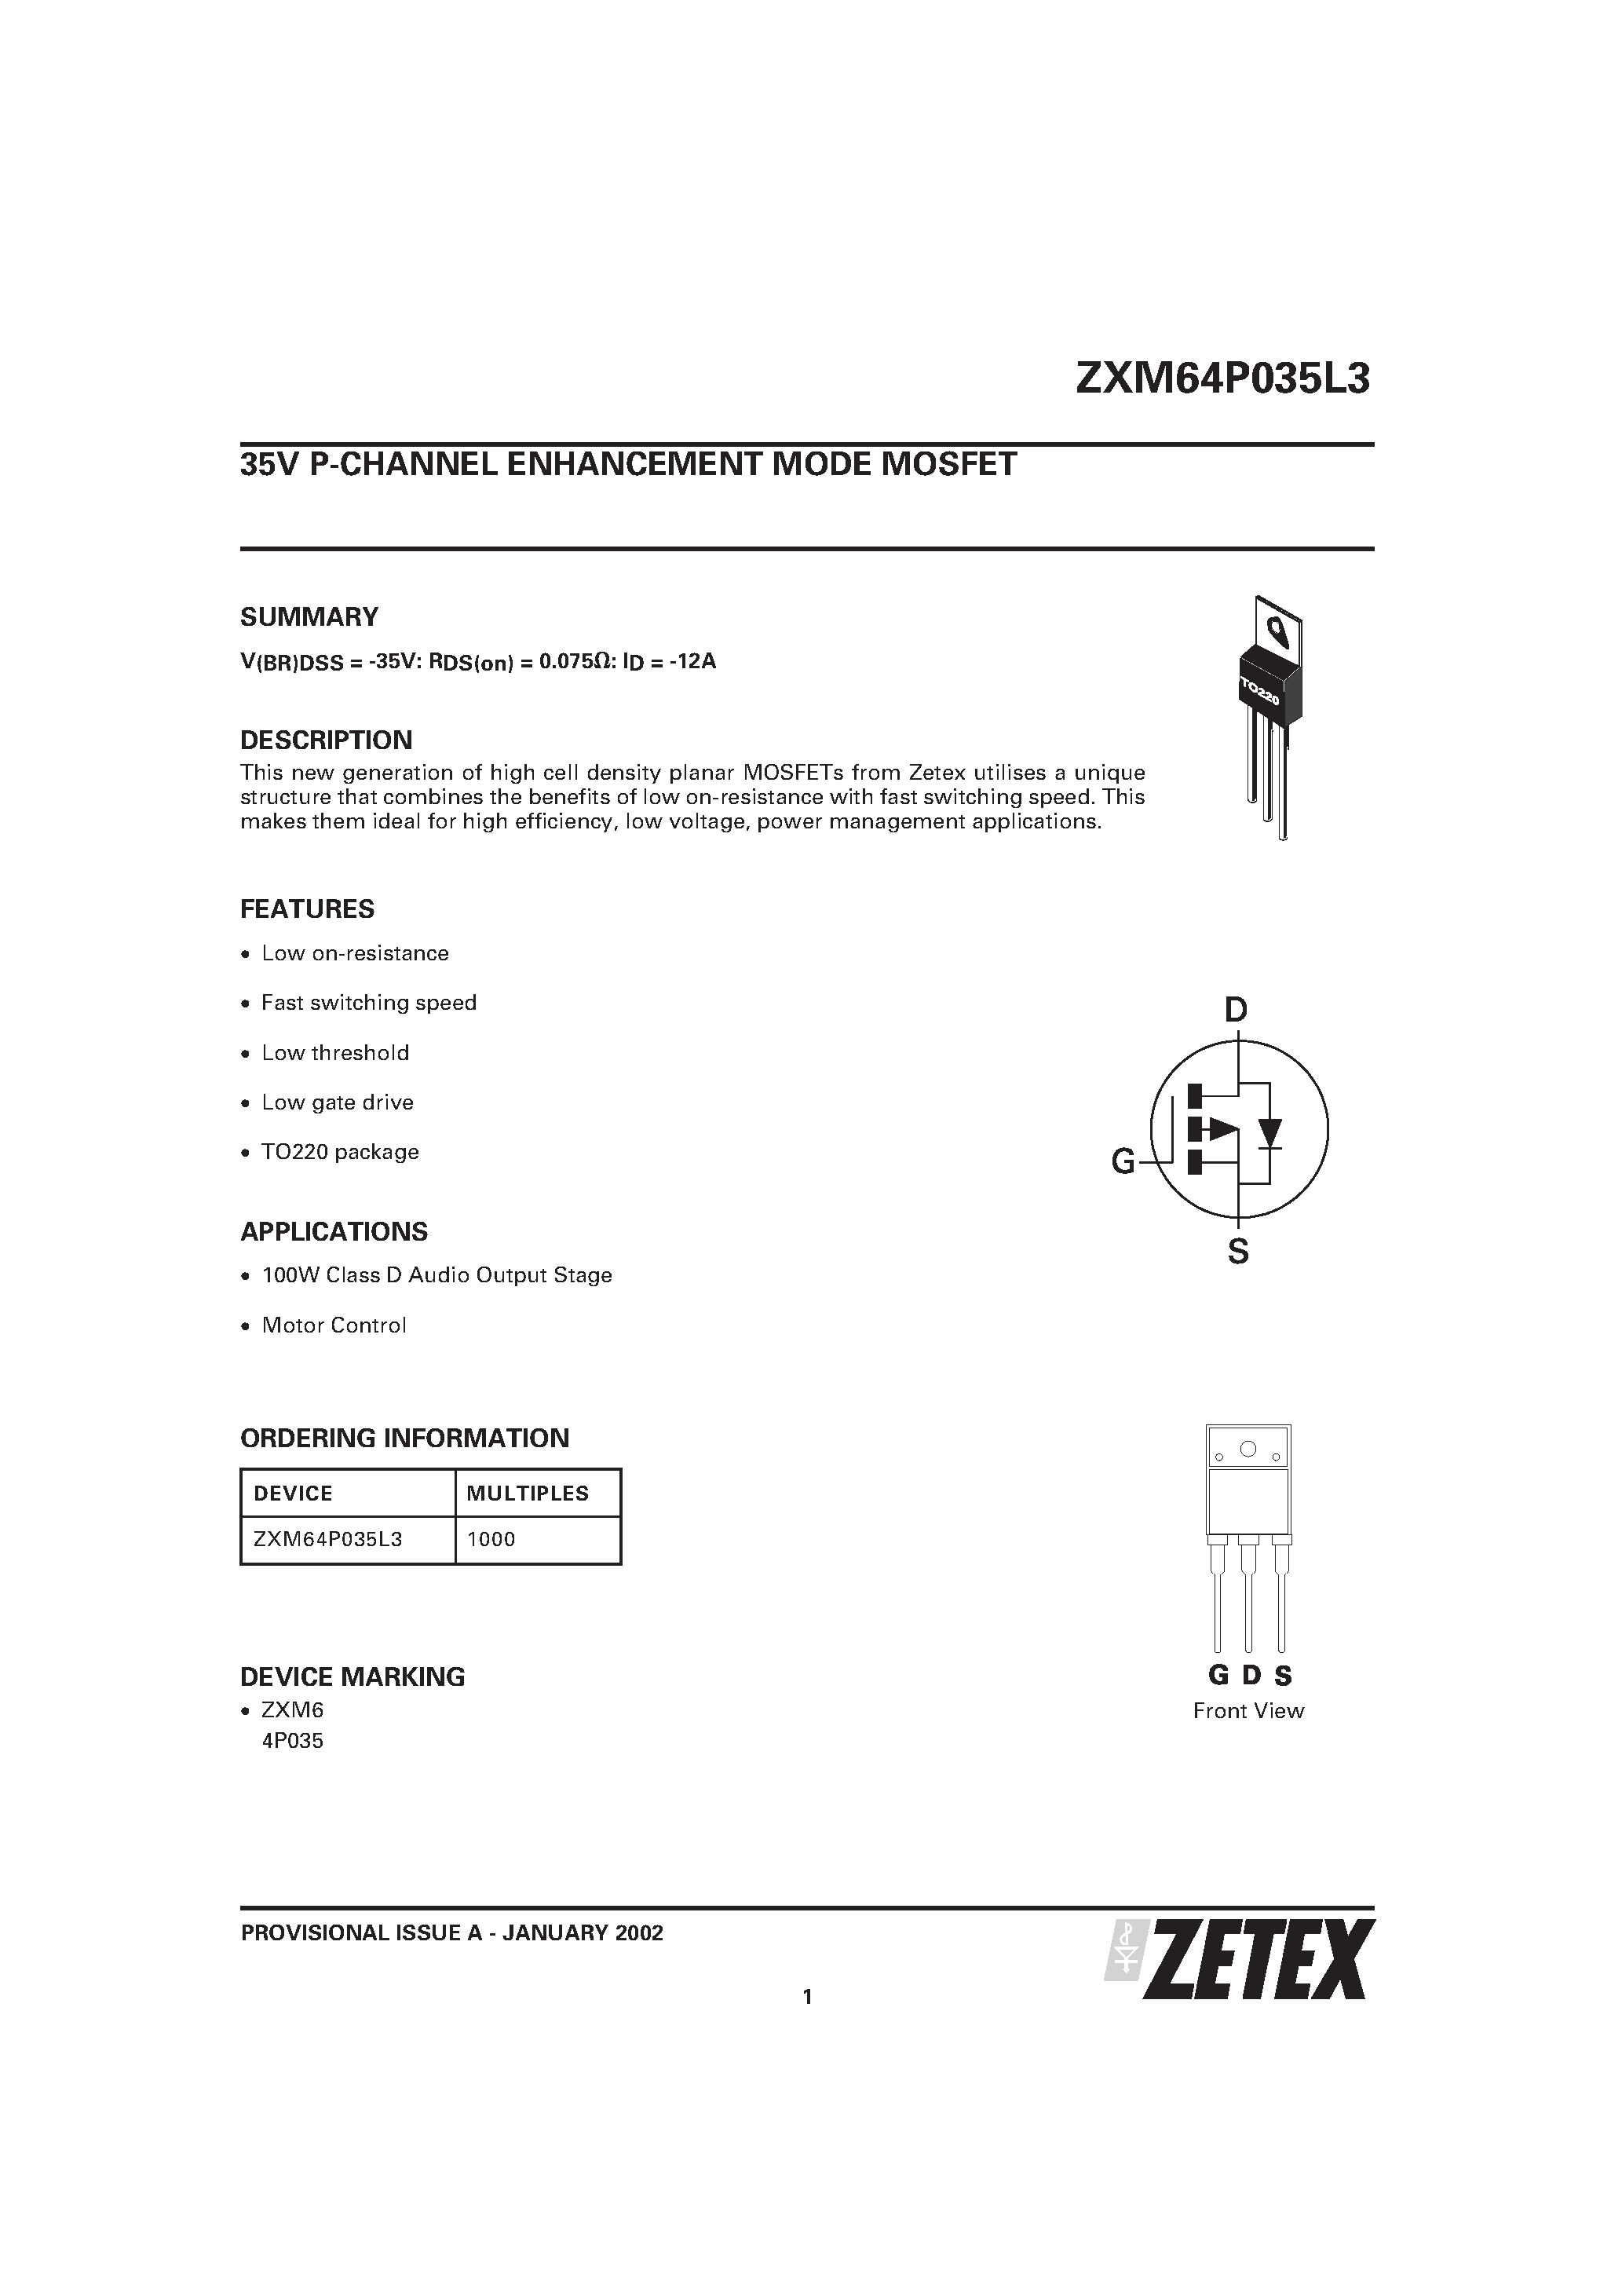 Datasheet ZXM64P035 - 35V P-CHANNEL ENHANCEMENT MODE MOSFET page 1